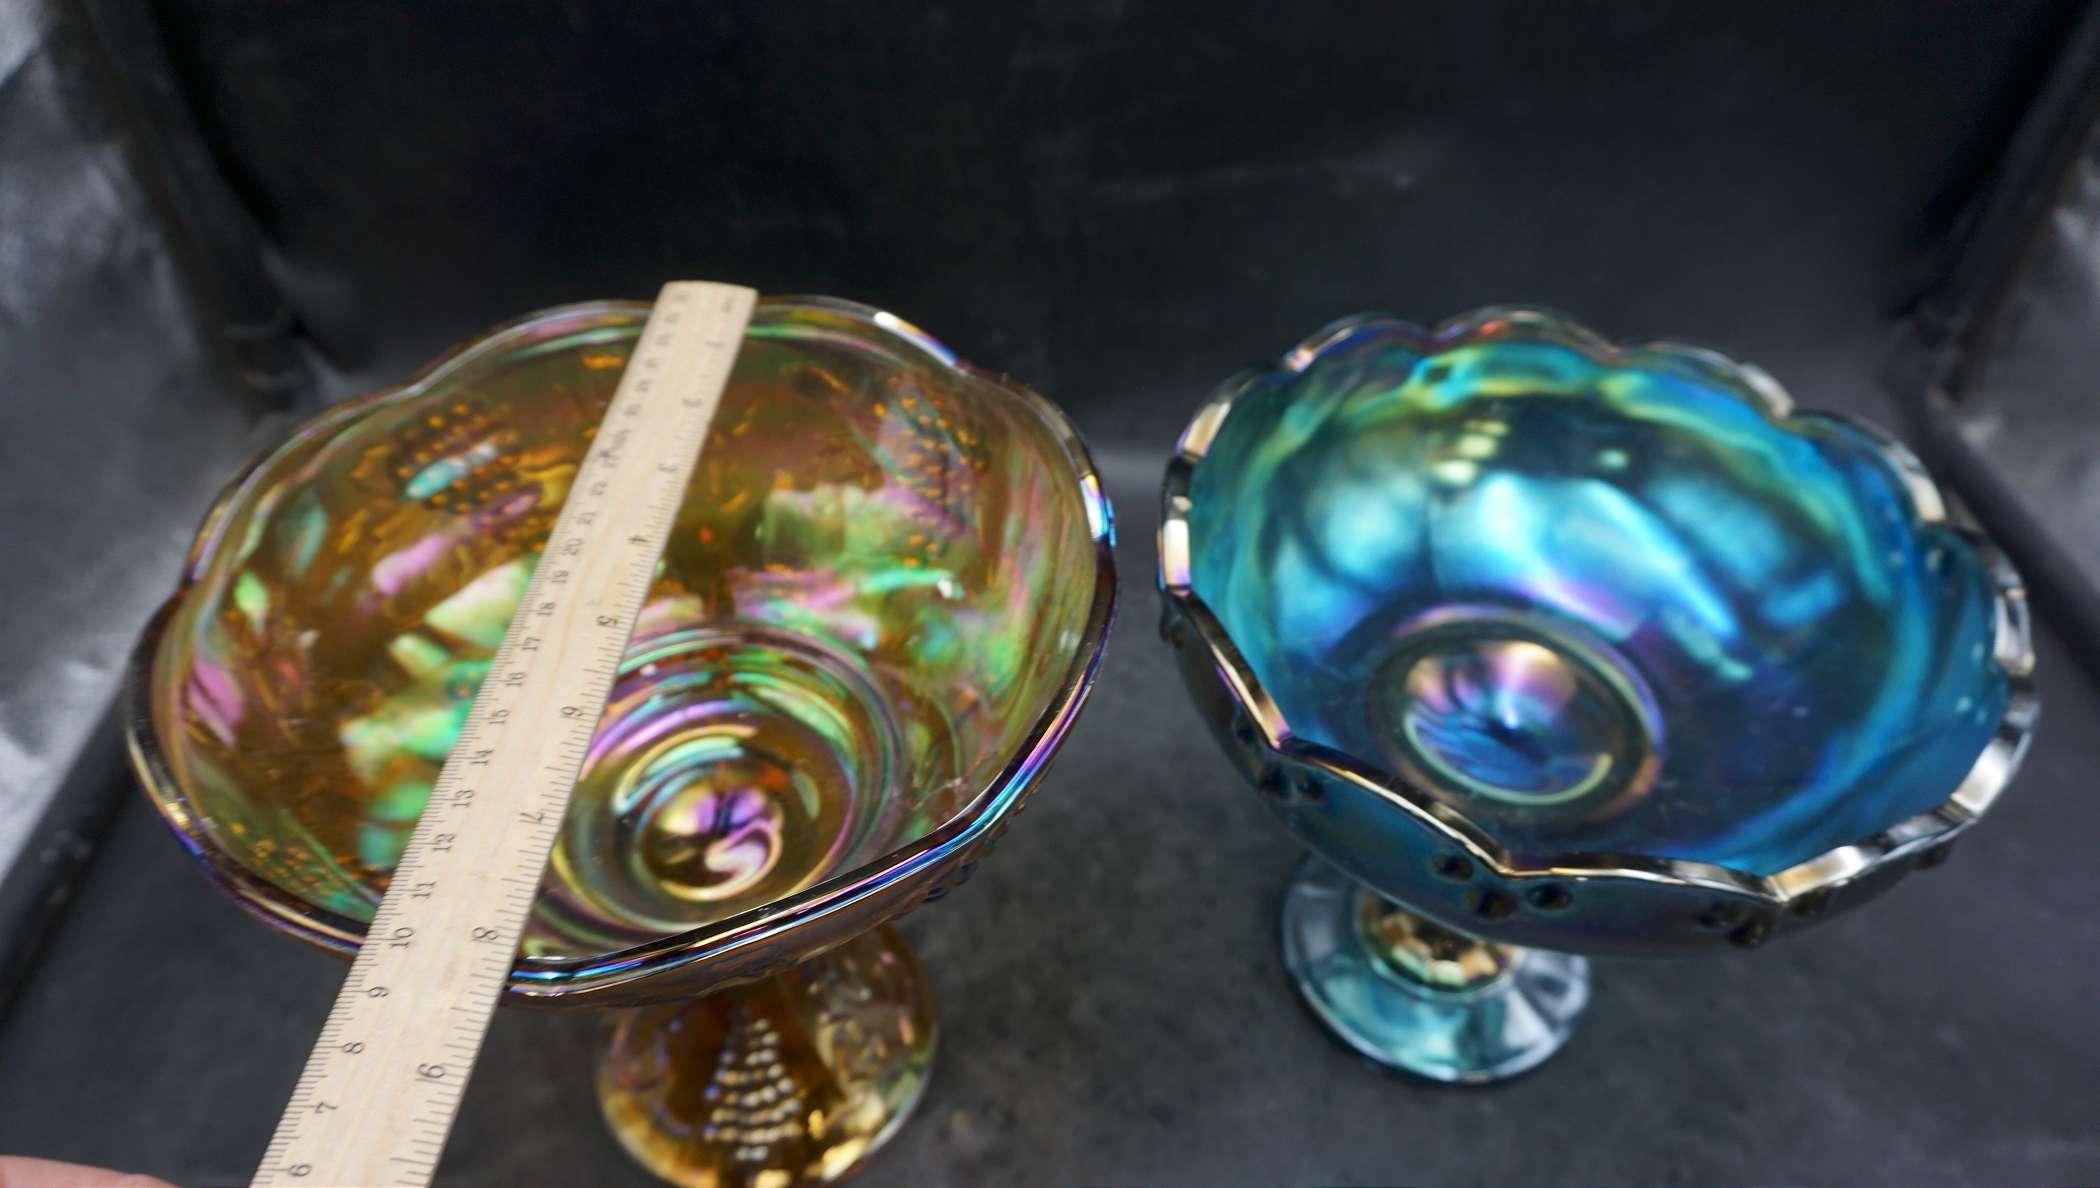 2 - Carnival Glass Compote Dishes